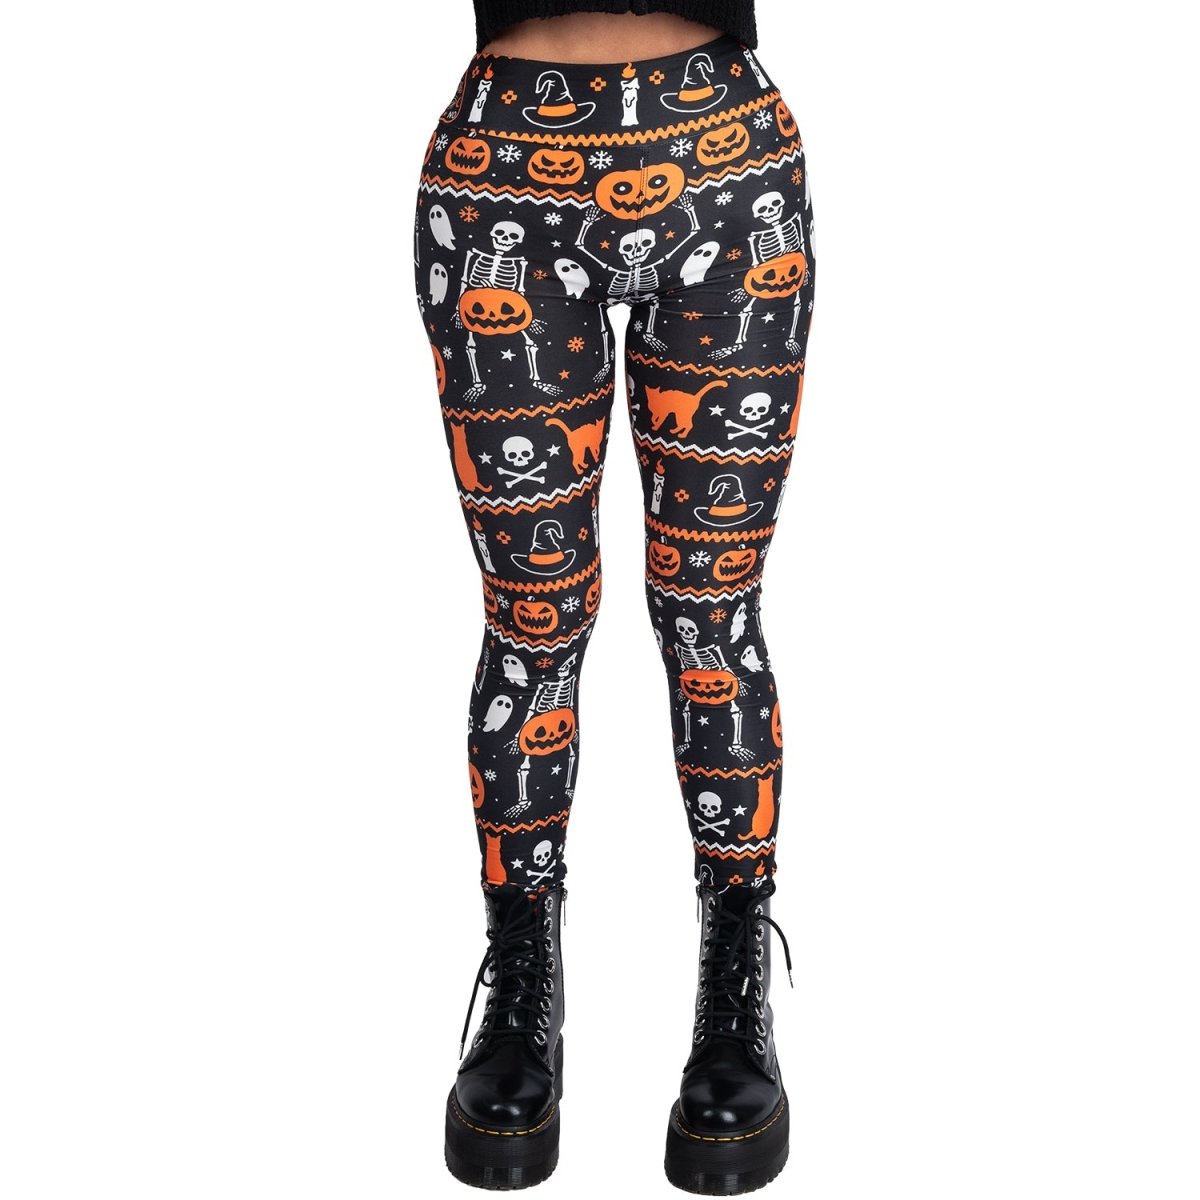  Indian Chief Skull Women's Yoga Pants High Waisted